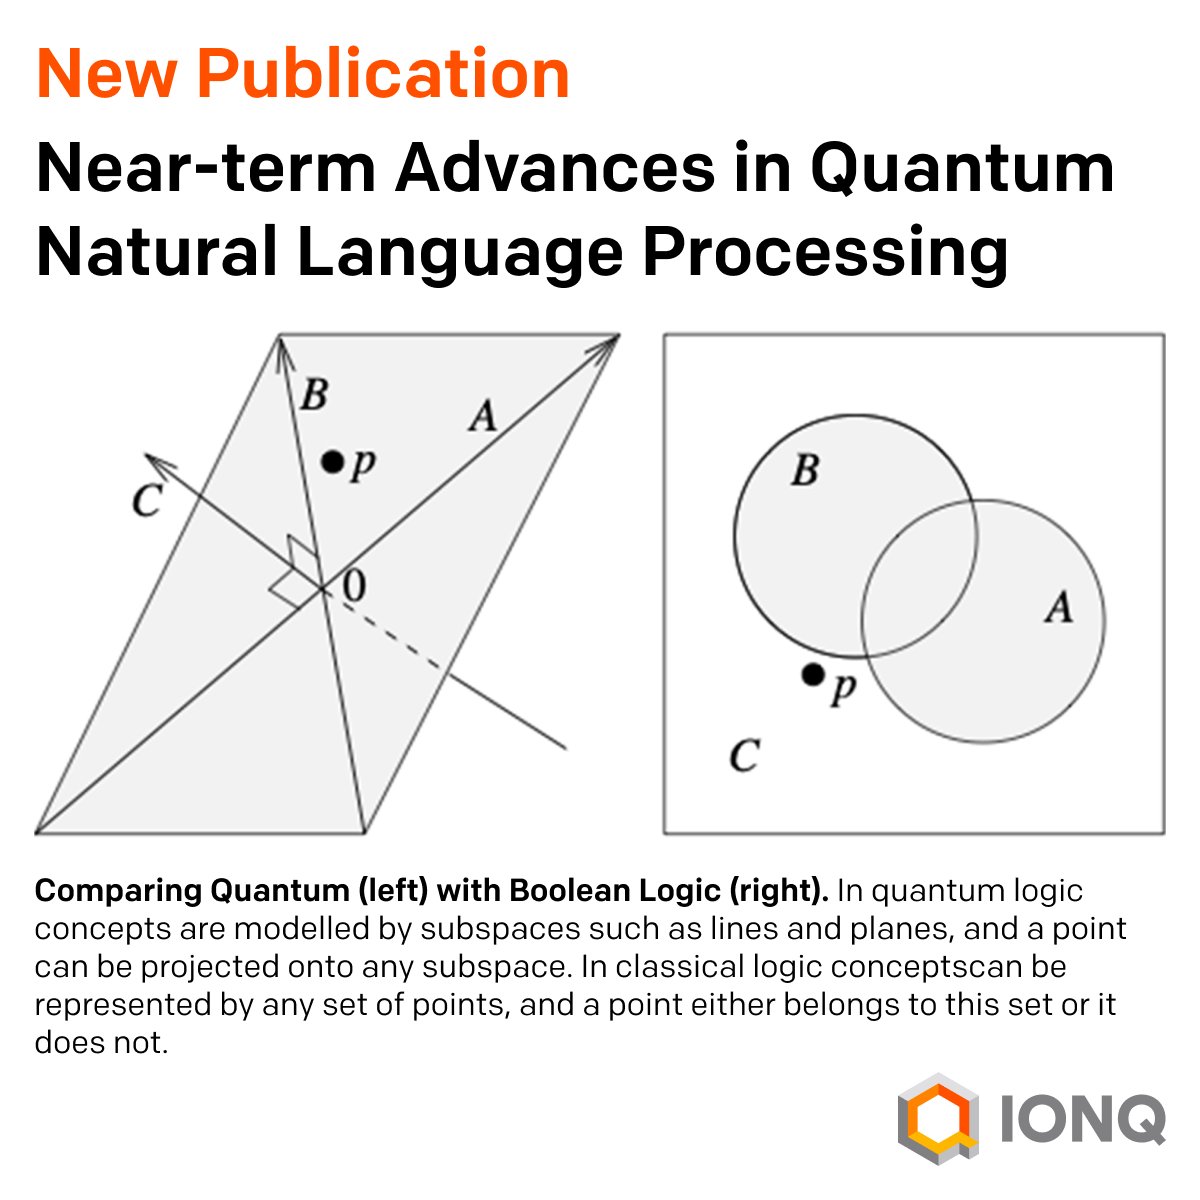 @IonQ_Inc researchers, led by @DominicWiddows, use various classification models to show accurate text classification results involving over 10,000 words, which is the largest such quantum computing experiment to date! Read the publication: link.springer.com/article/10.100…